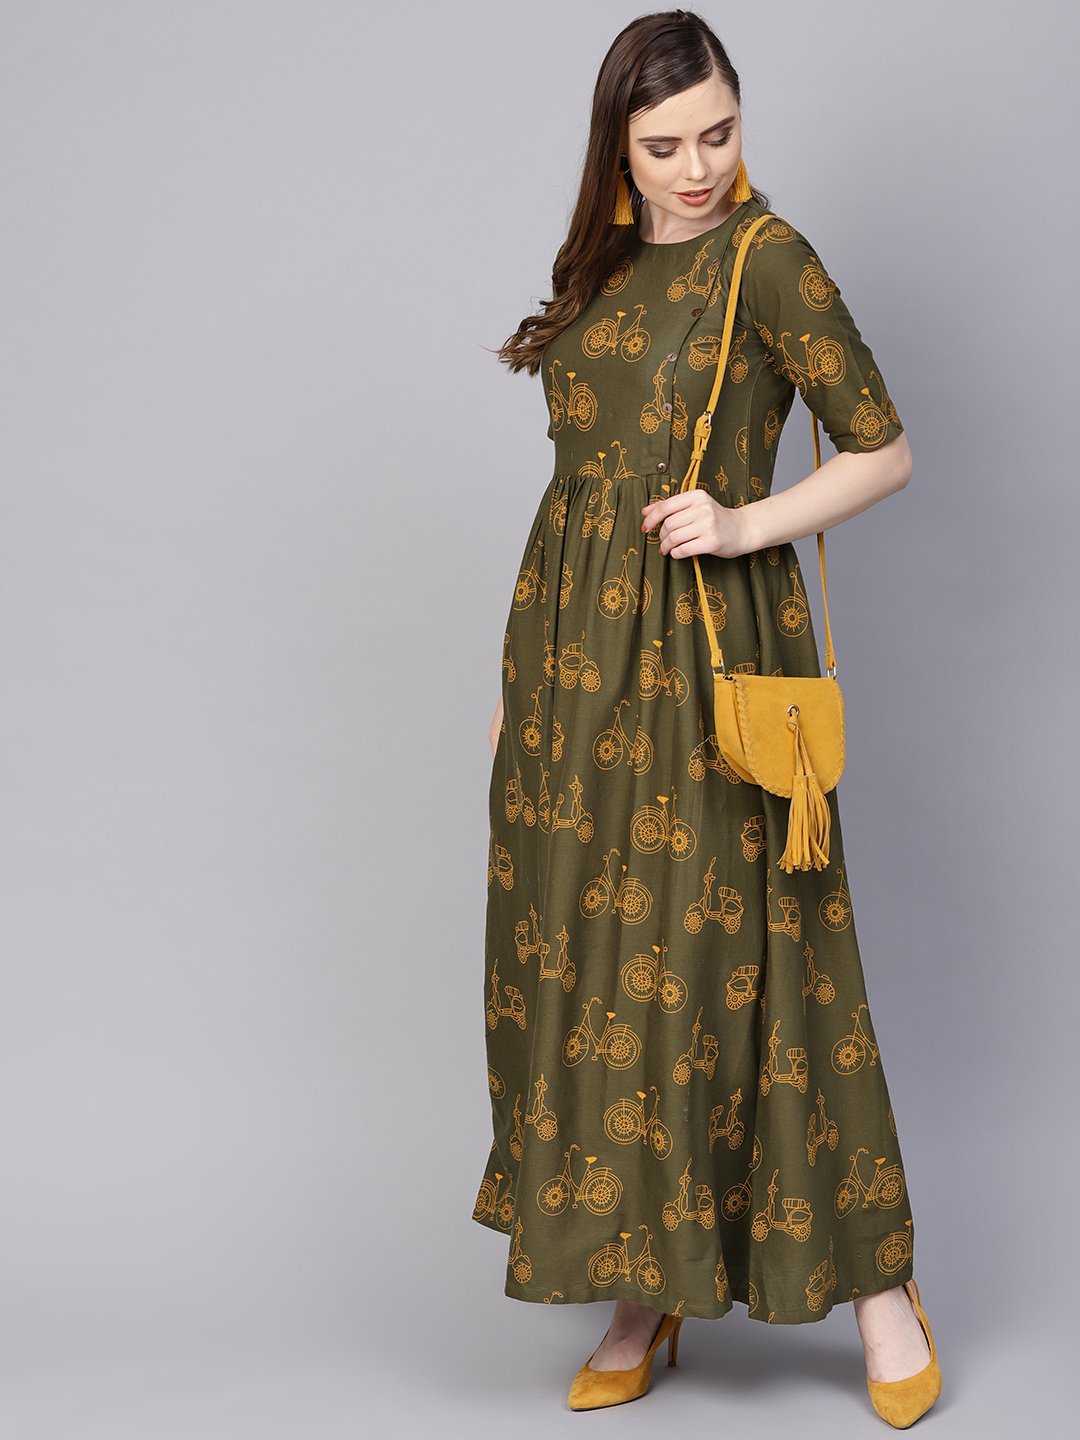 Women's Military Green Printed Maxi Dress With Side Shoulder Placket With Half Sleeves - Nayo Clothing